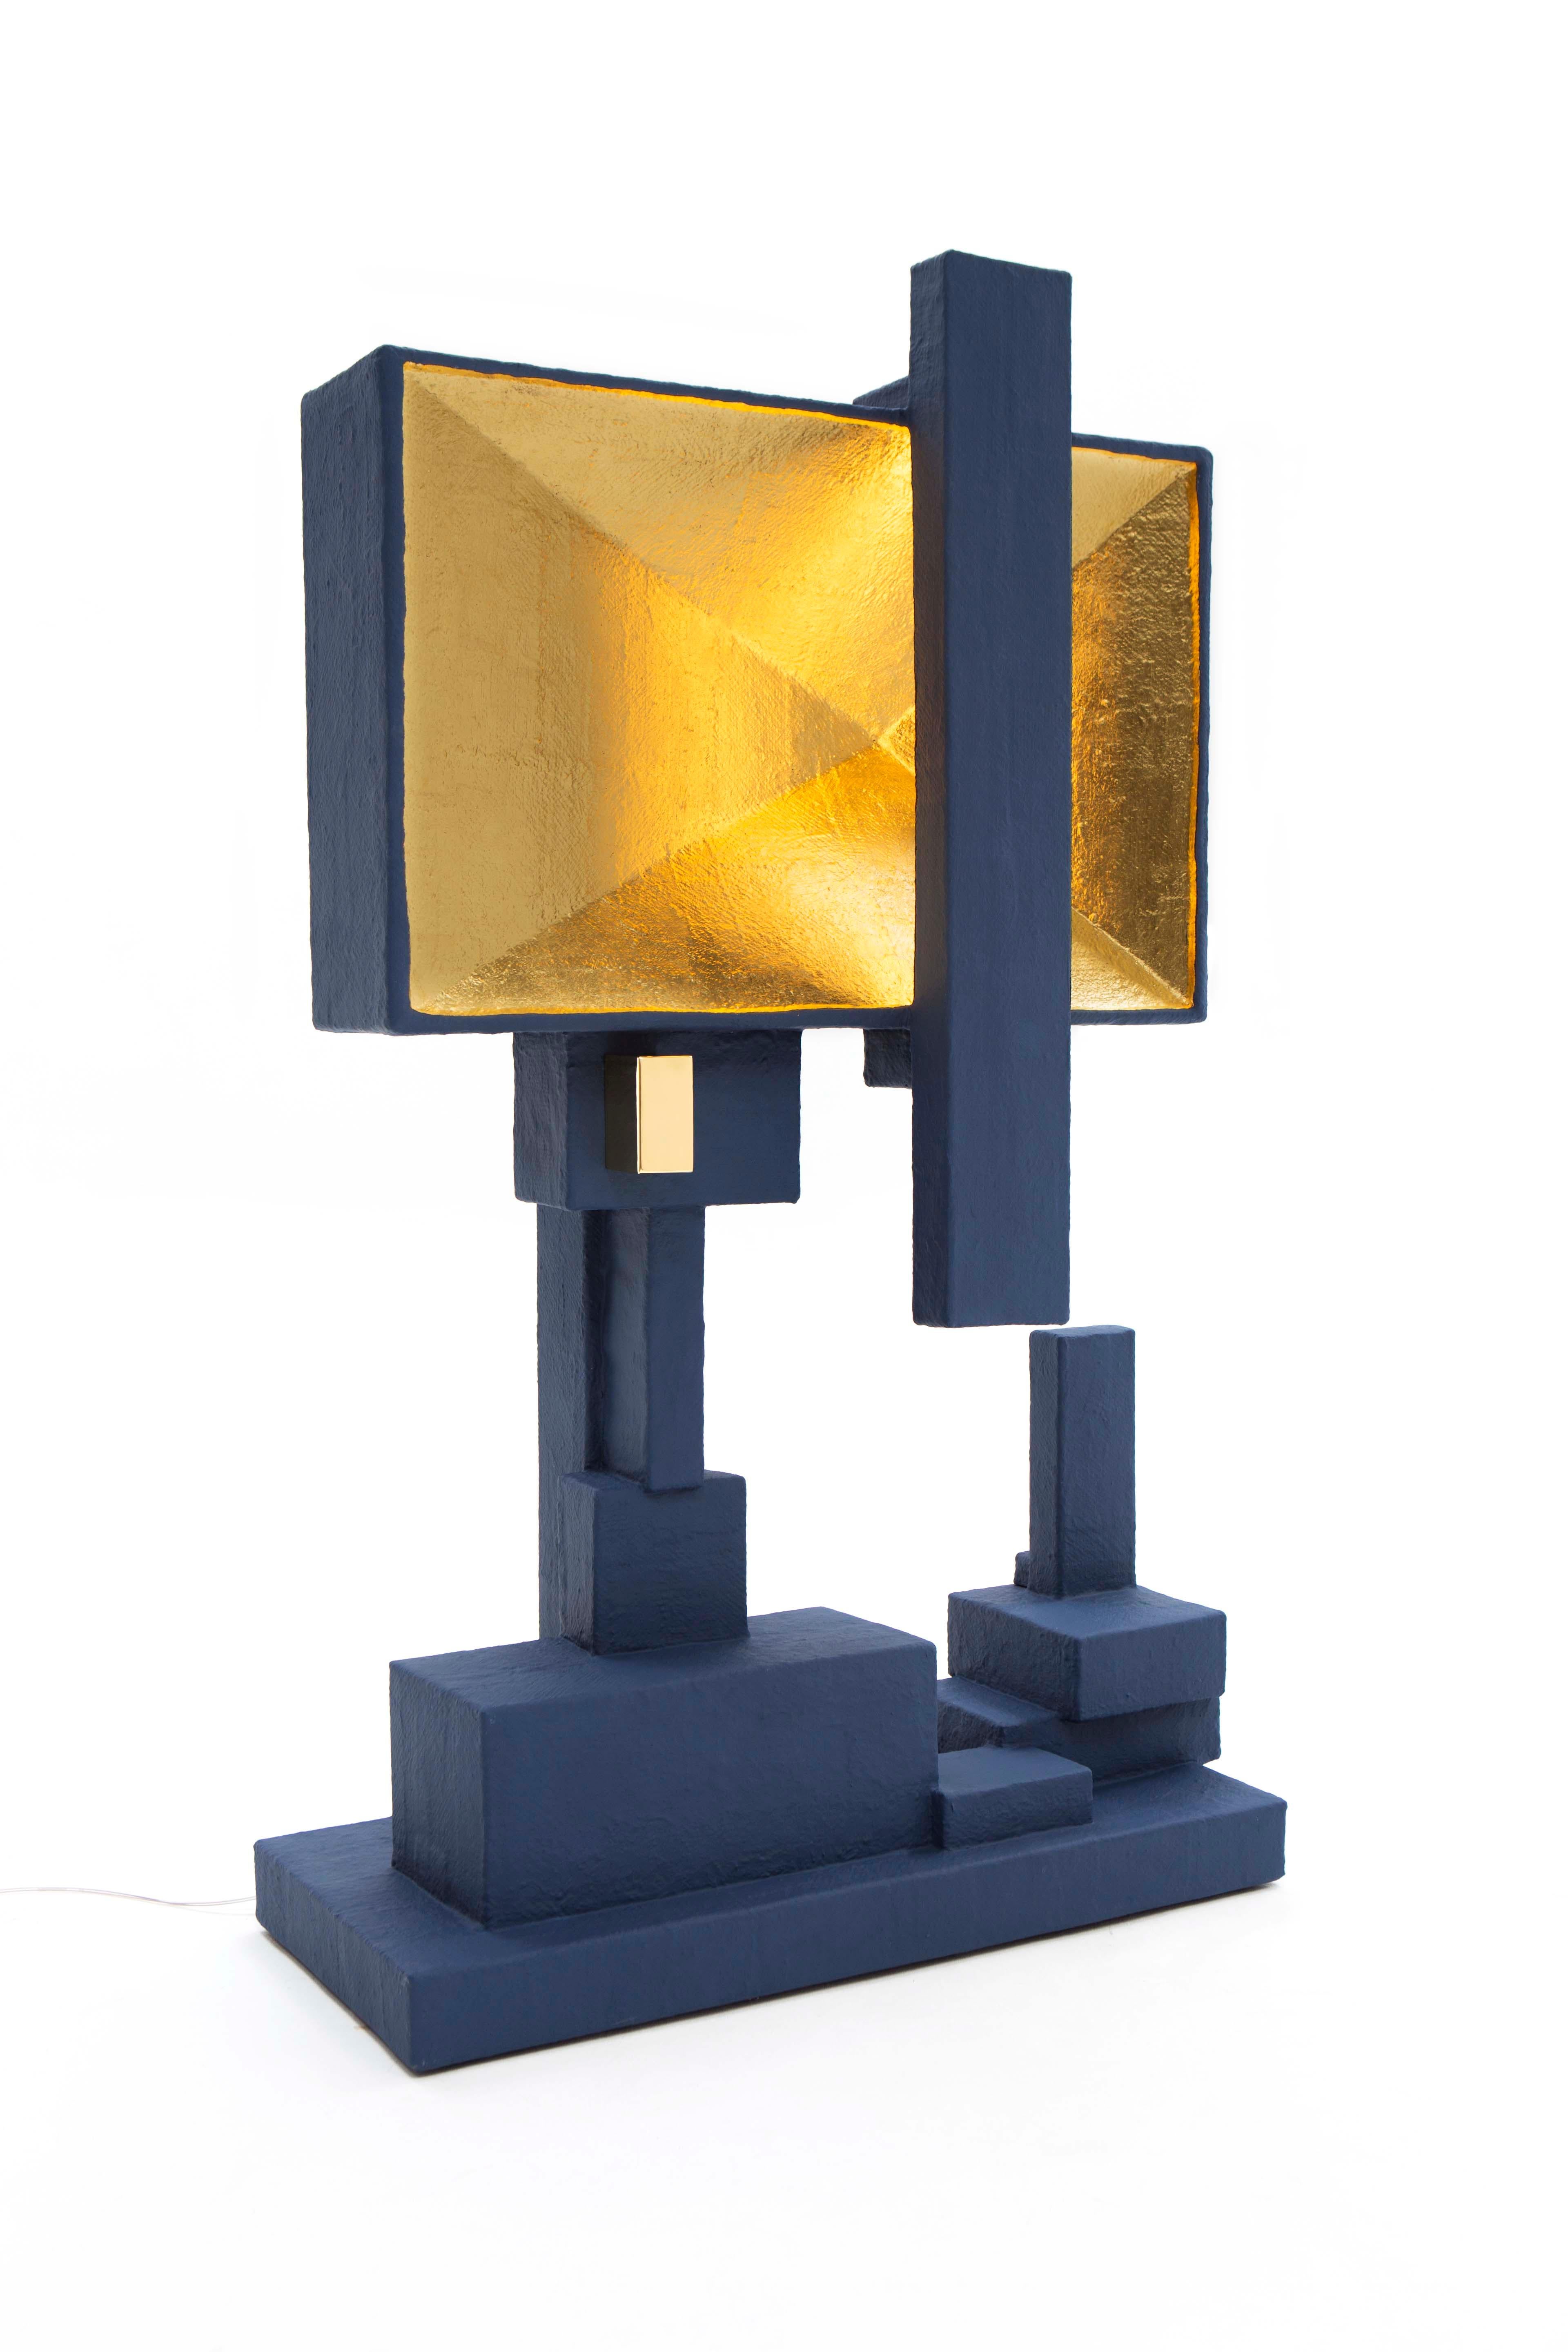 The BOX-2 Standing Lamp

With the BOX-2 Josha pushed the sizes of his pieces to a next level! When he received the centre box (a tv box) he decided to scale up his work. This resulted in an impressive sculptural piece that draws all attention! The